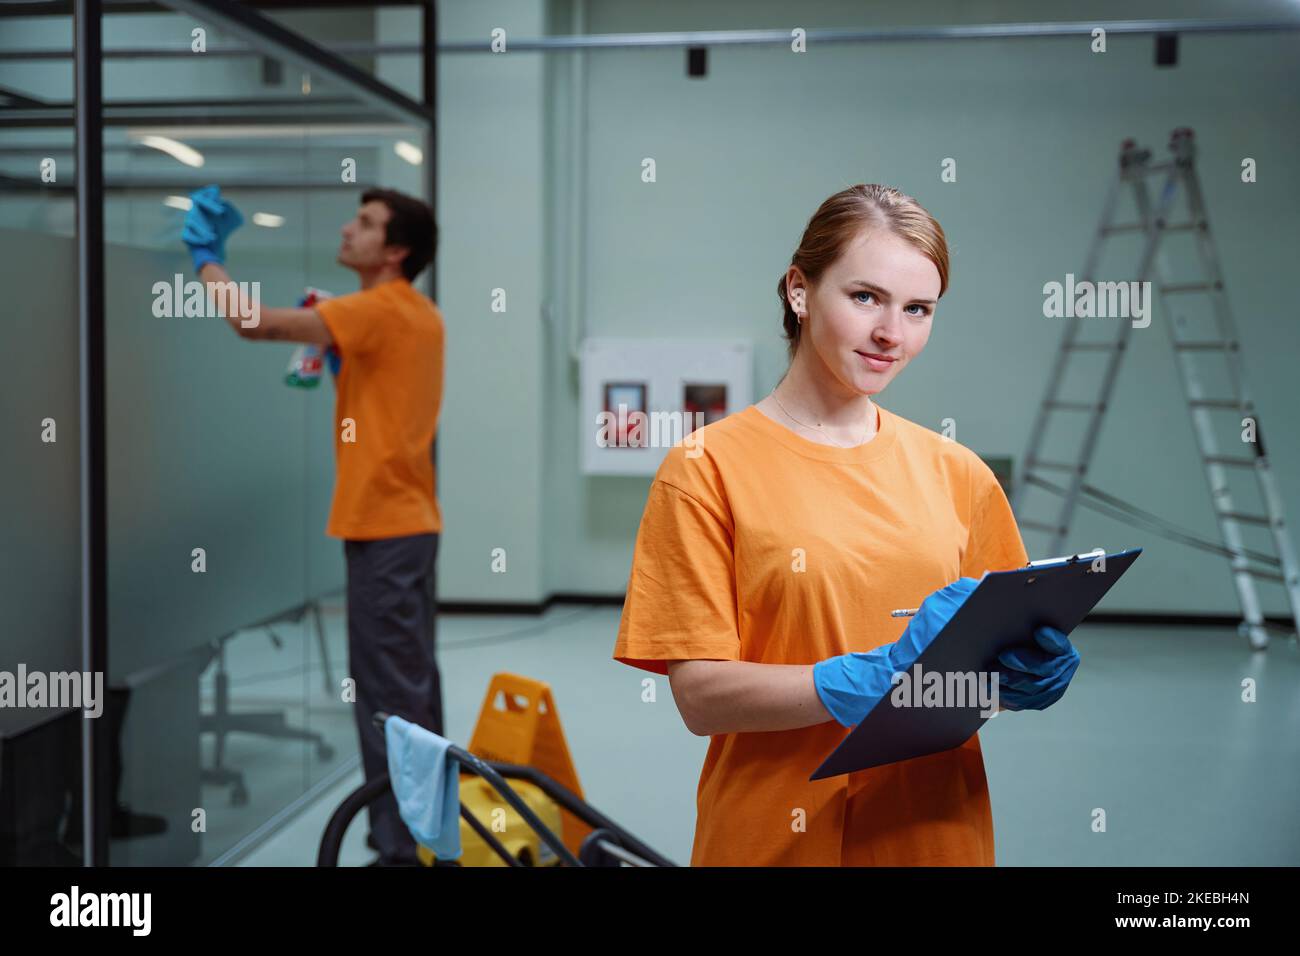 Professional cleaners accomplishing corporate request according to the checklist Stock Photo